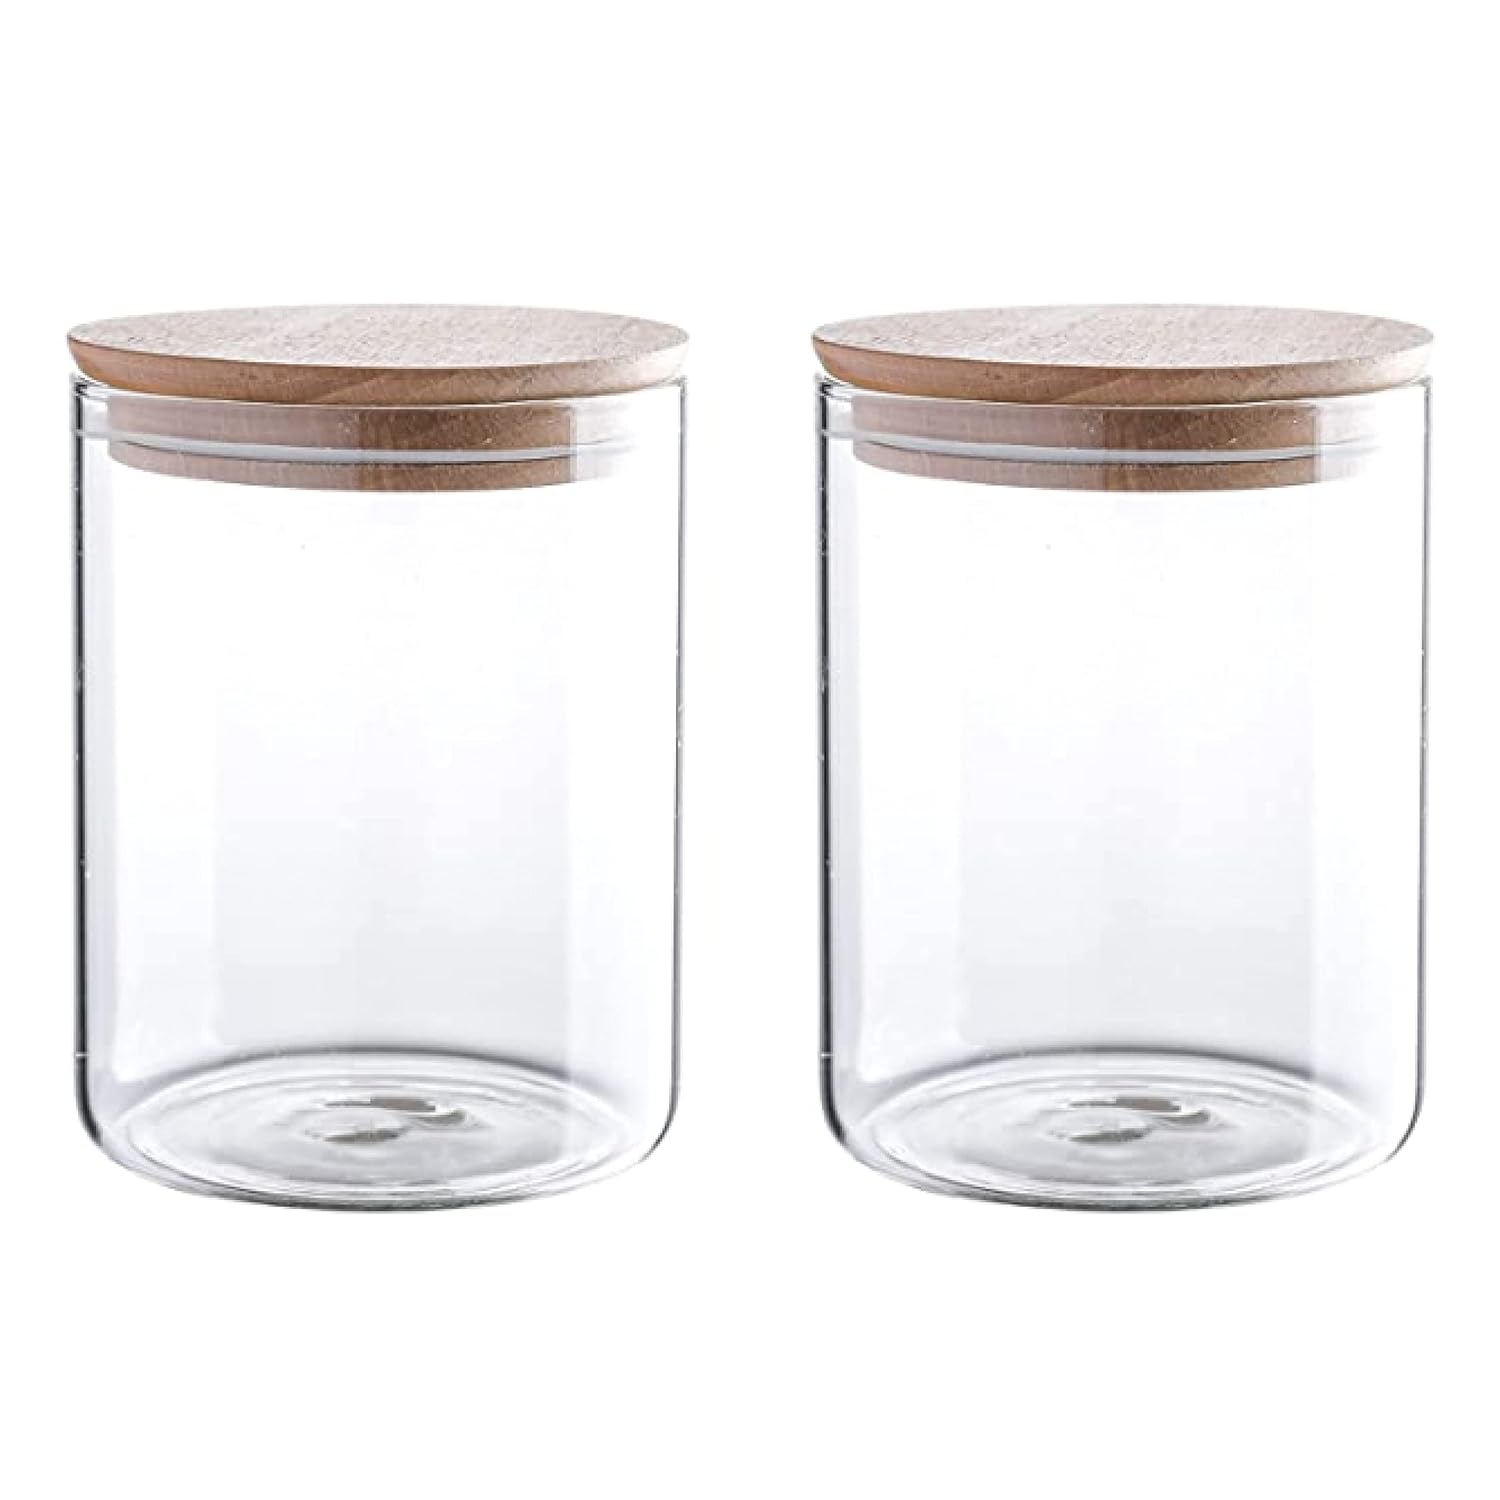 WHOLE HOUSEWARES 24 oz Clear Canister Set with Beech Wood Lids | 2 pcs Food Storage Canister for Kitchen & Pantry Organization and Storage | Ideal for Grains, Sugar, Spices & Herbs